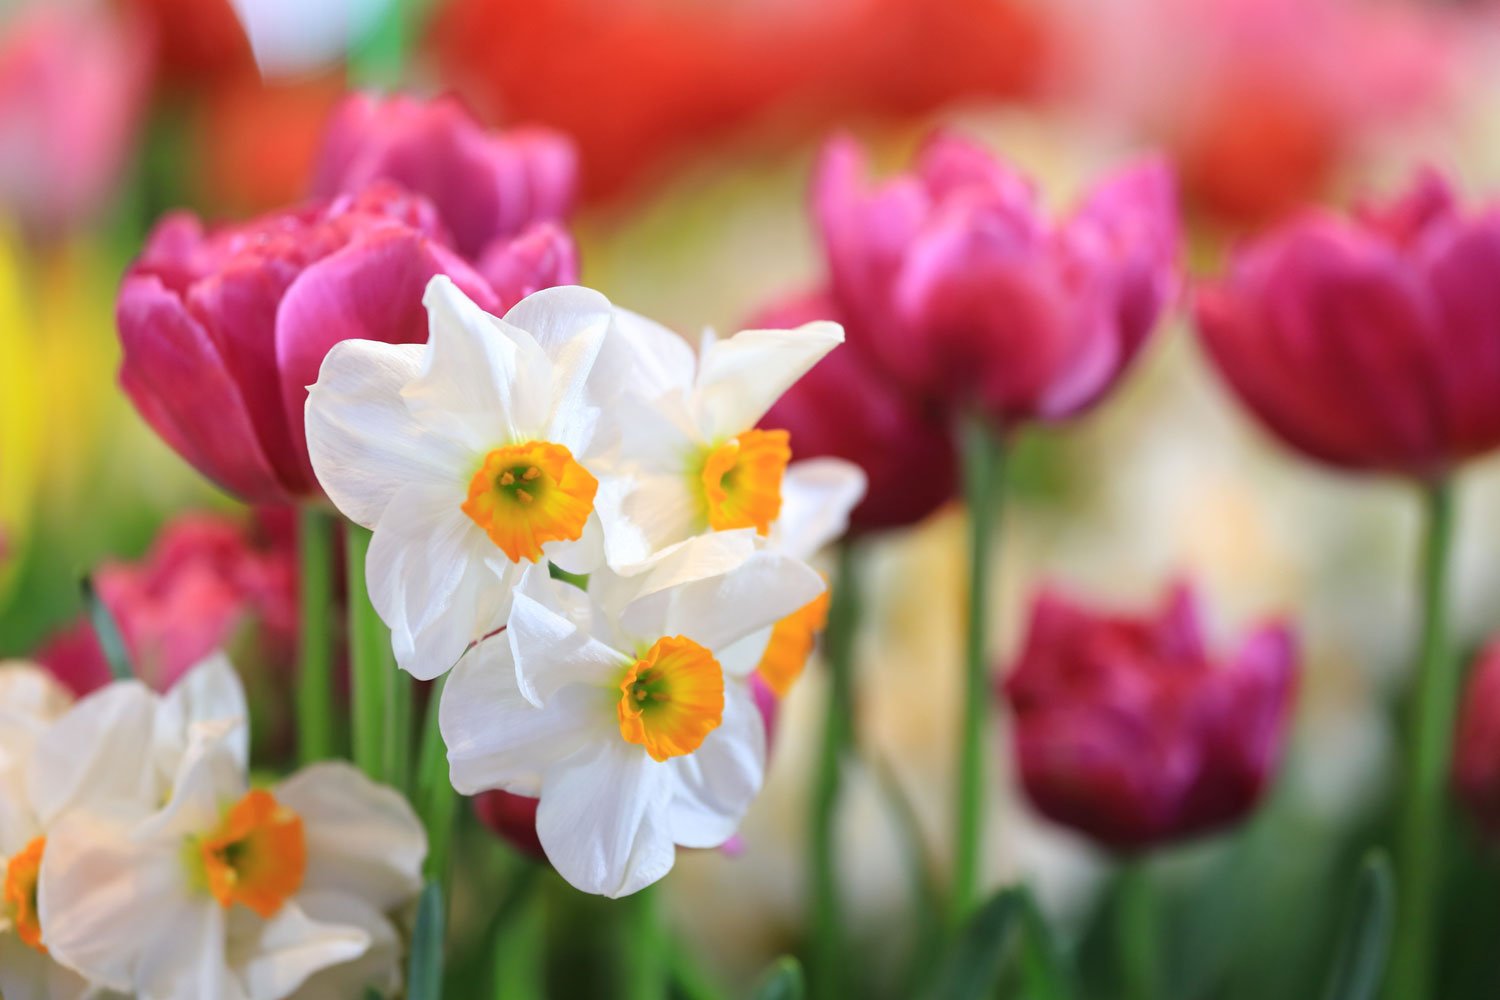   the garden awaits…    April Gardening Tips    See Our Tips  